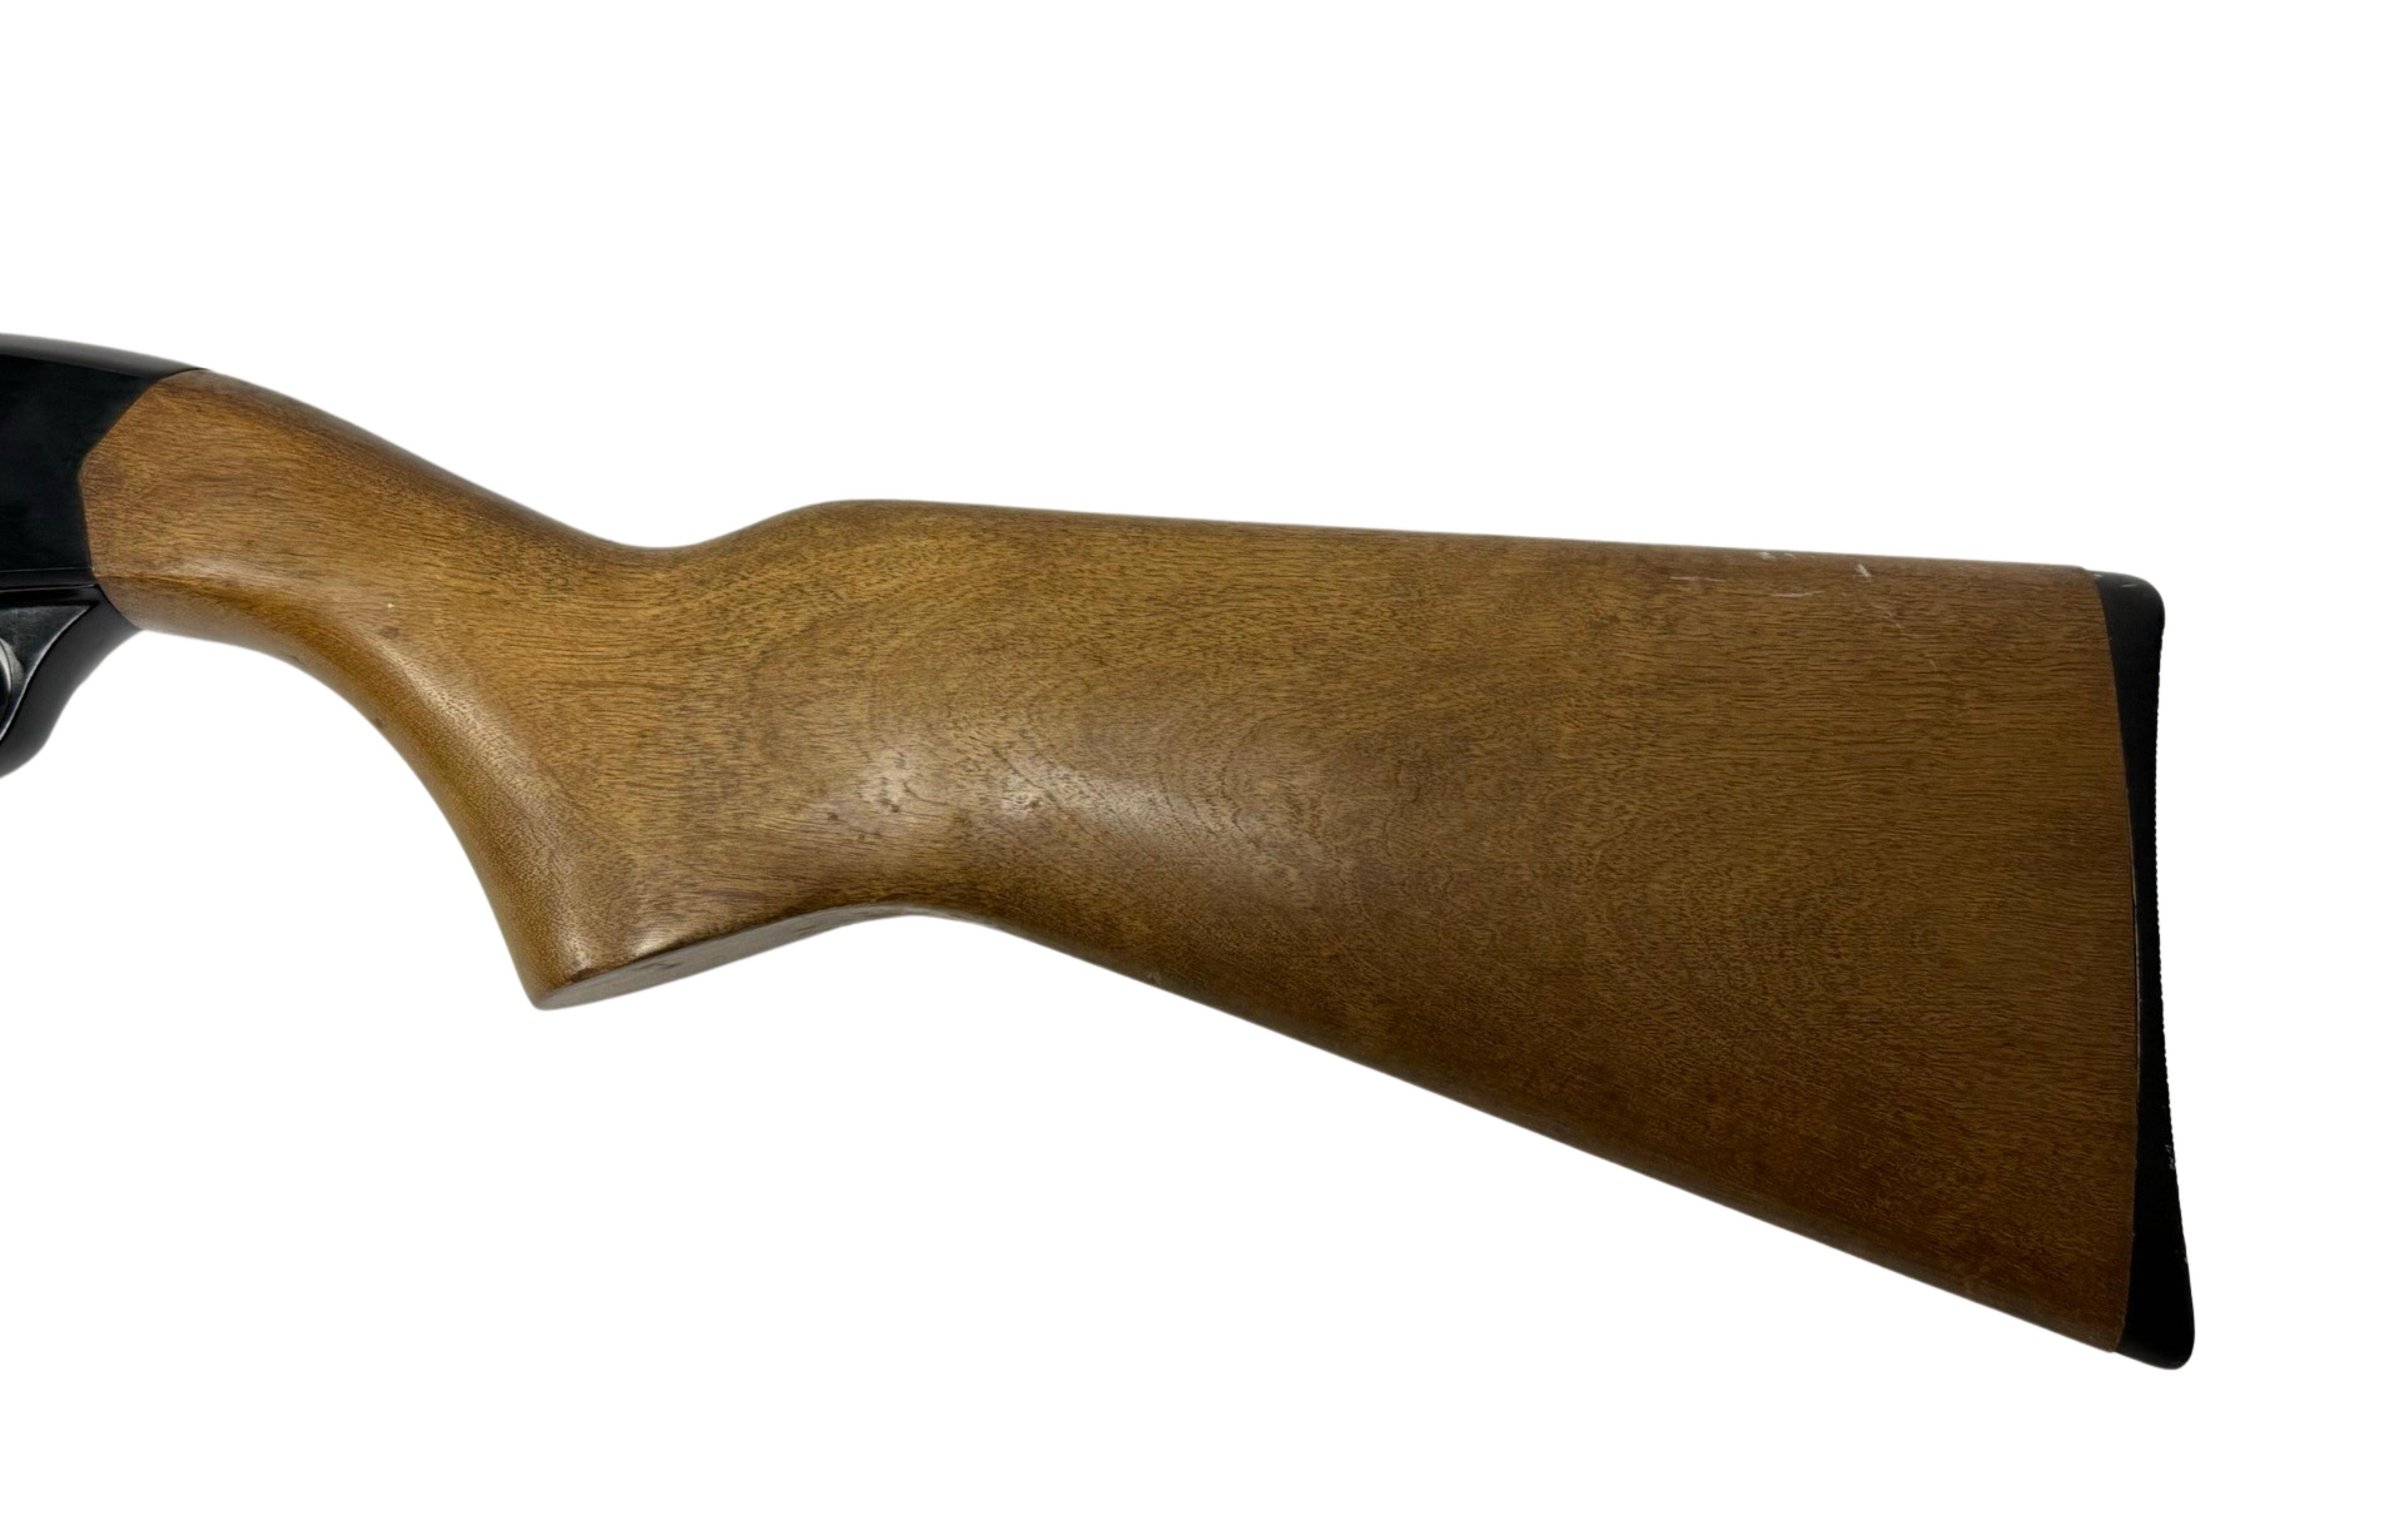 Excellent Winchester Model 190 .22 L or LR Semi-Automatic Rifle